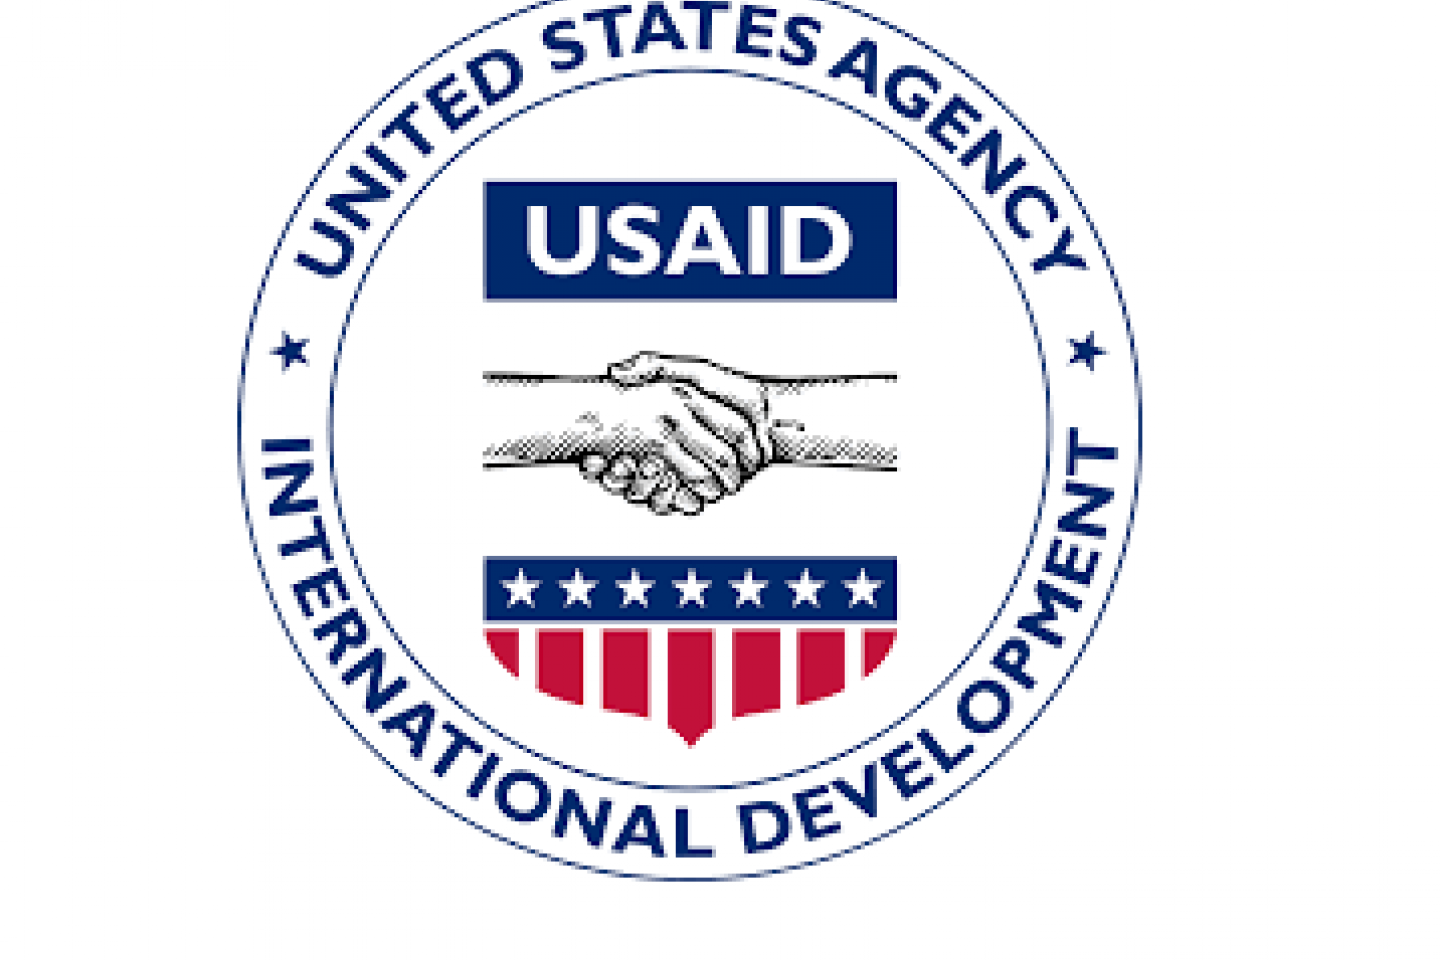 US To Provide Ukrainian Government $4.5 Billion To Help Keep It Functioning, Says USAID